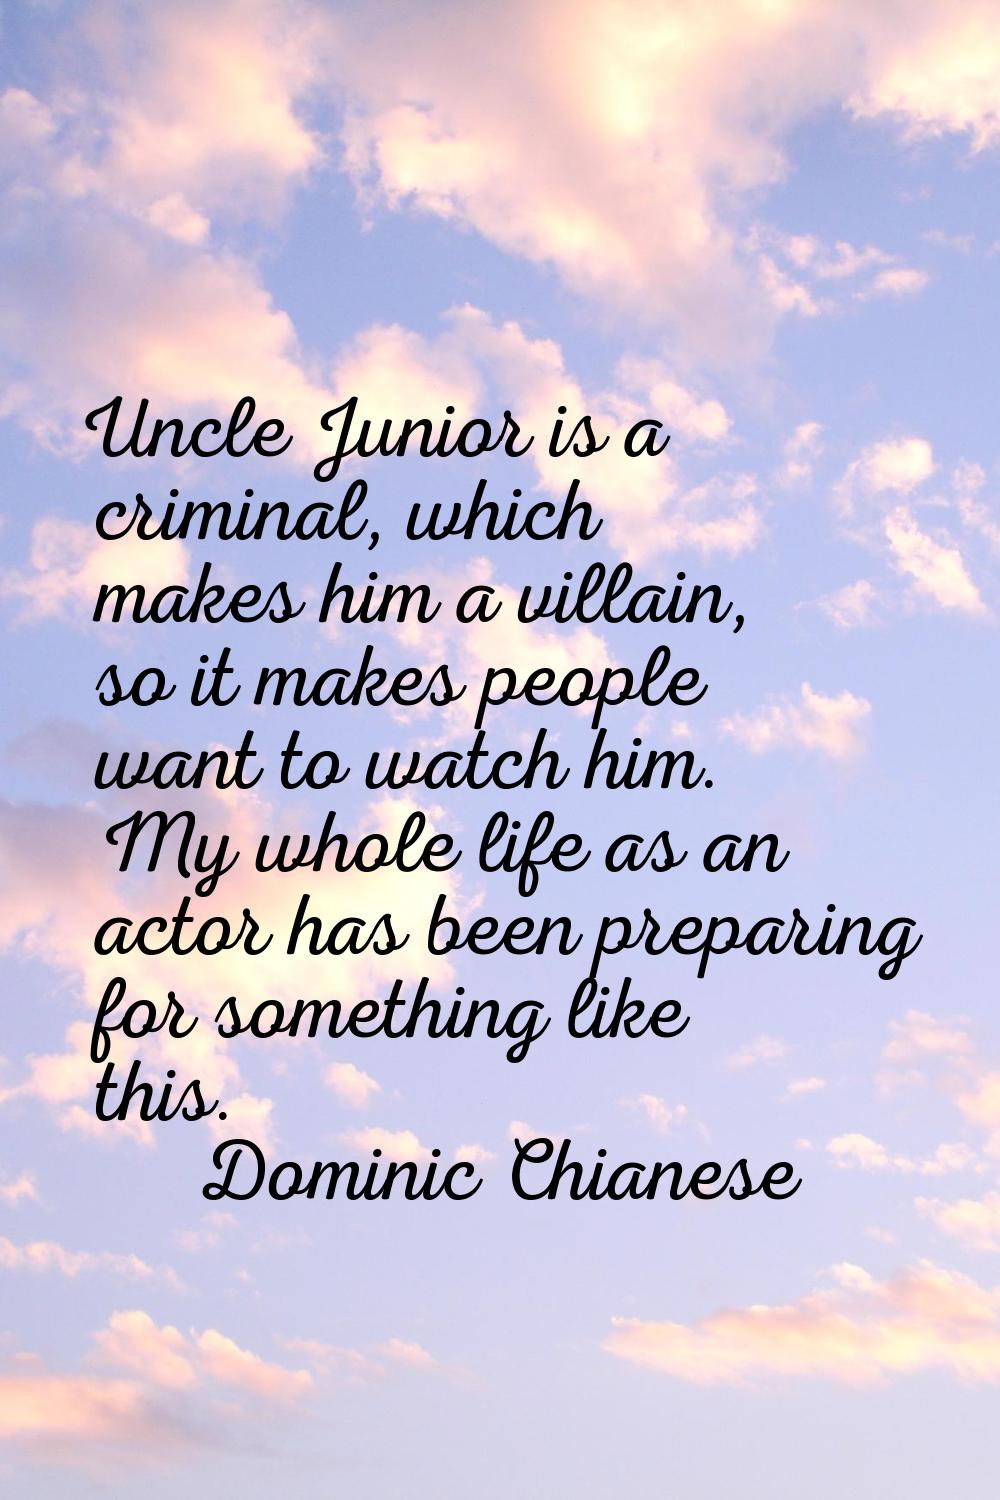 Uncle Junior is a criminal, which makes him a villain, so it makes people want to watch him. My who